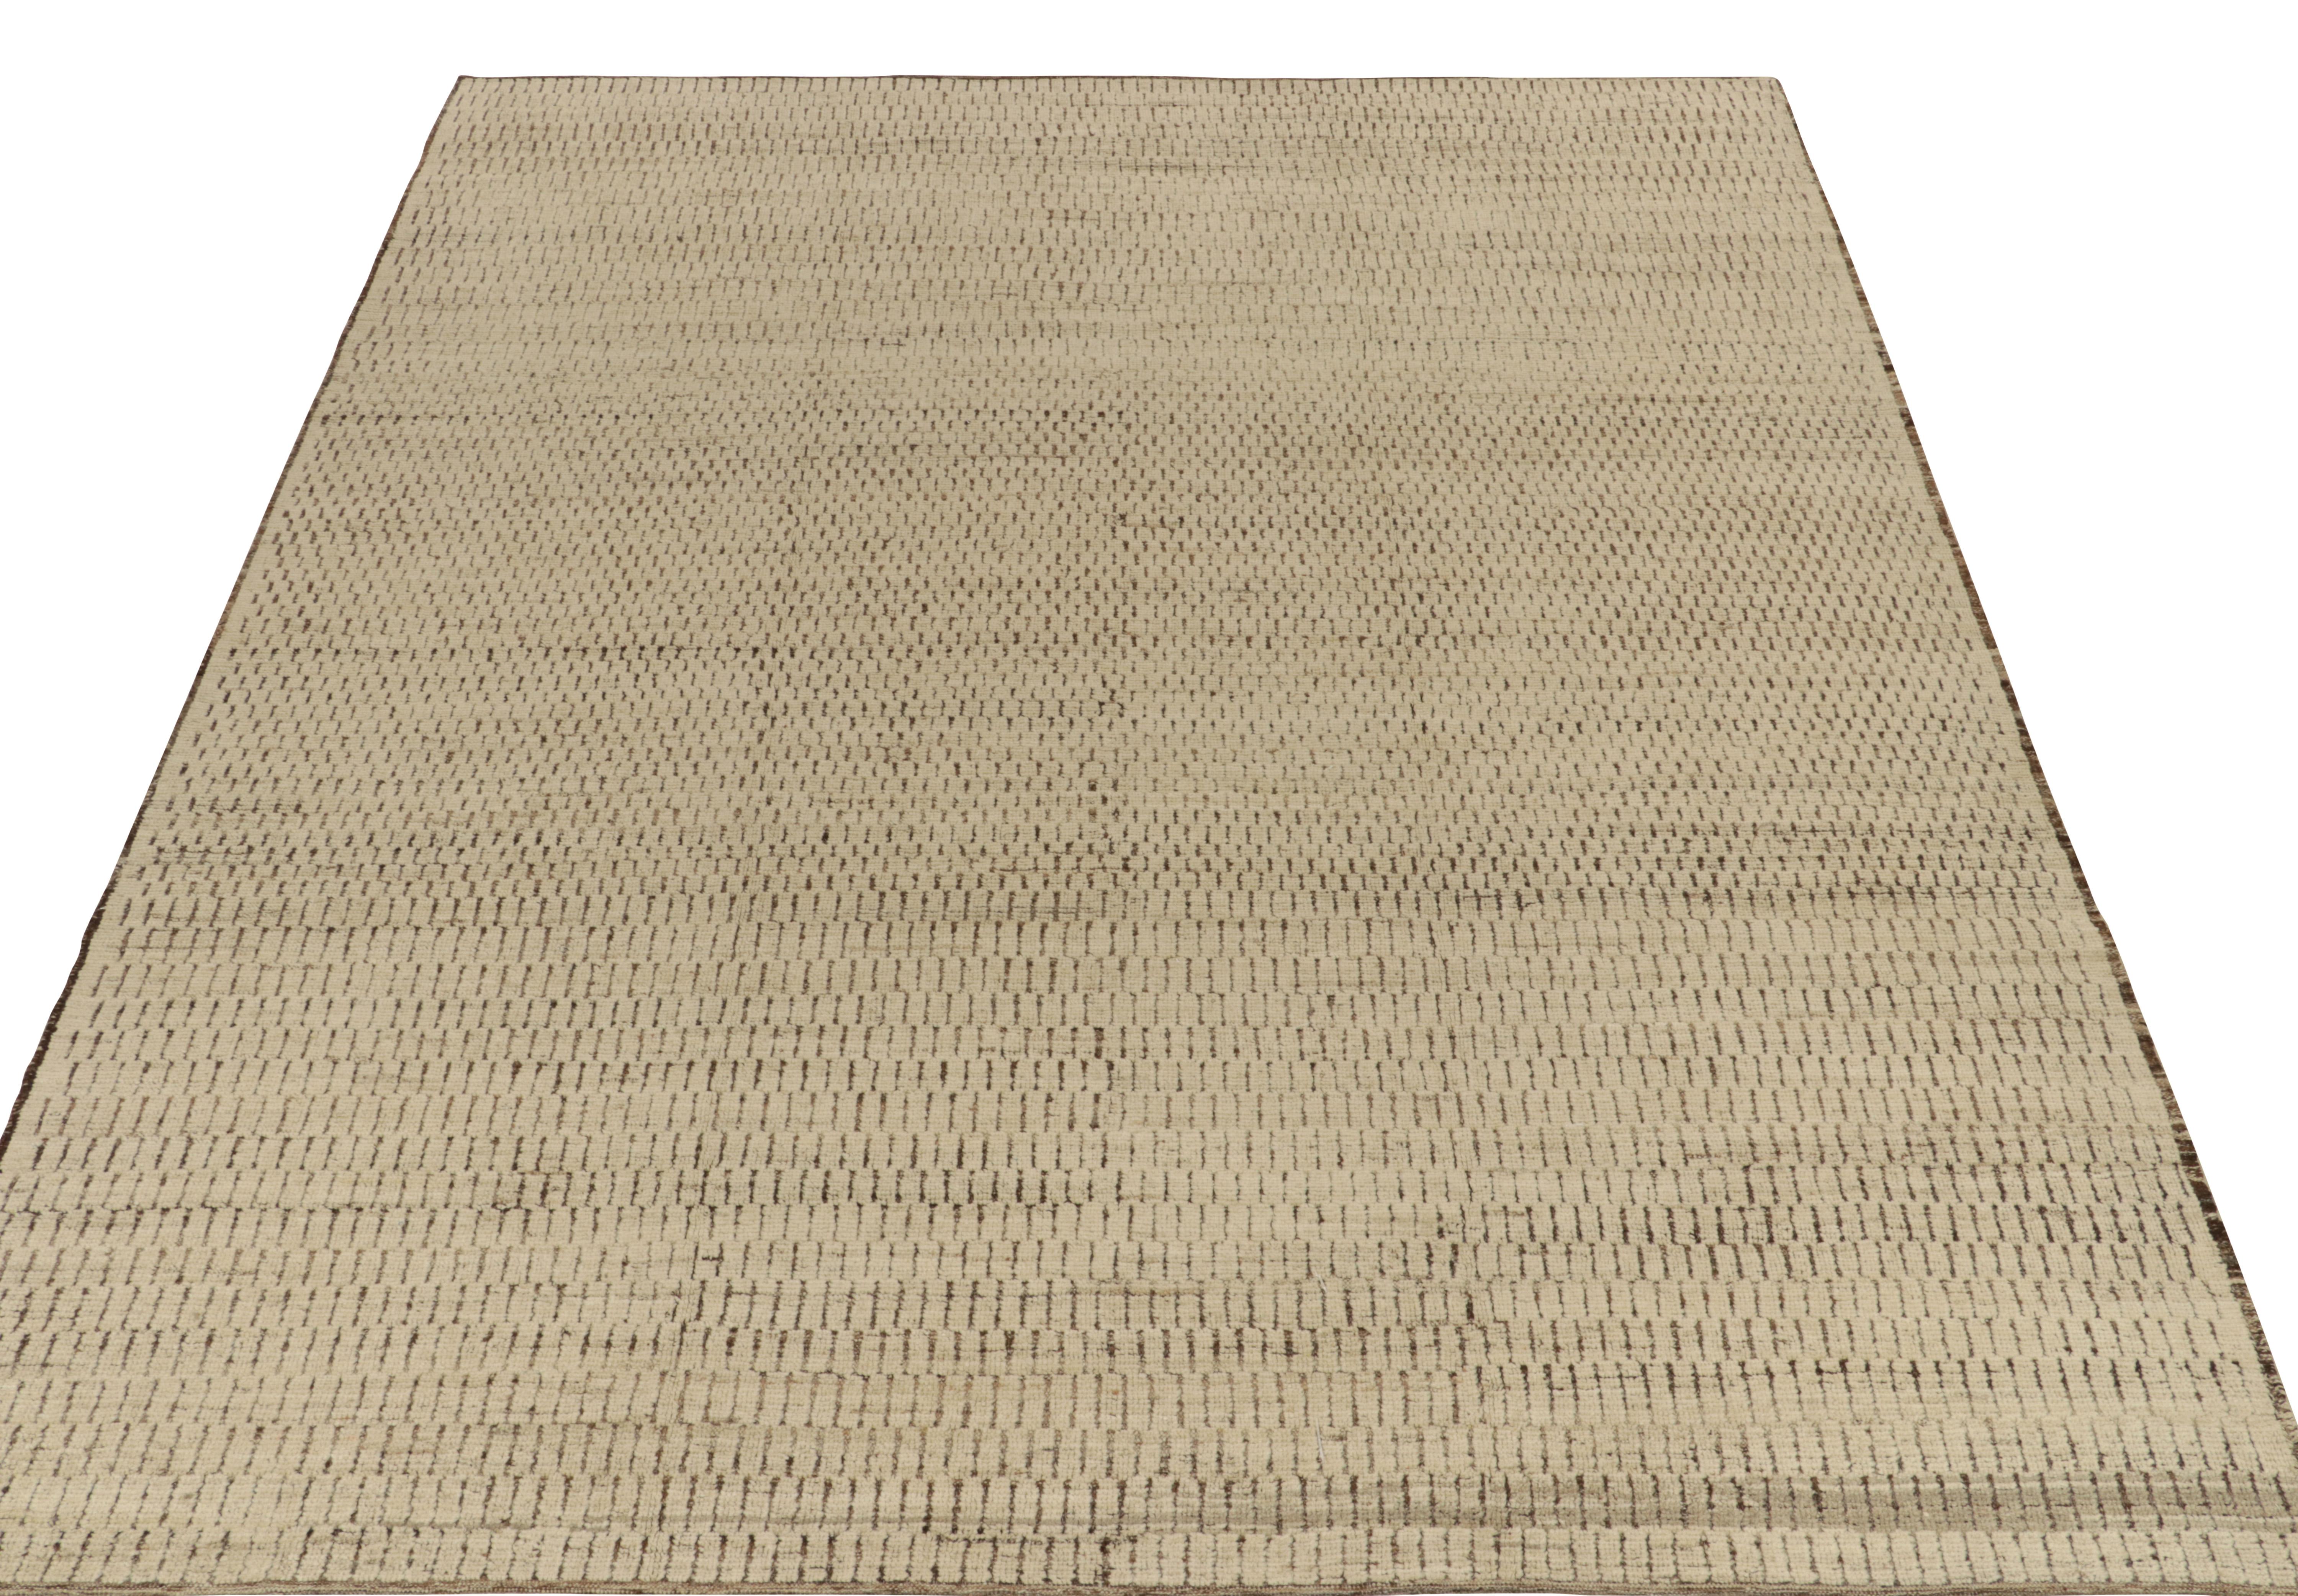 Rug & Kilim presents a contemporary take on Moroccan style with this 10x12 hand-knotted wool piece of sublime texture. The rug enjoys a comfortable high low appeal in forgiving beige brown geometric pattern manifesting as a close knit brick wall